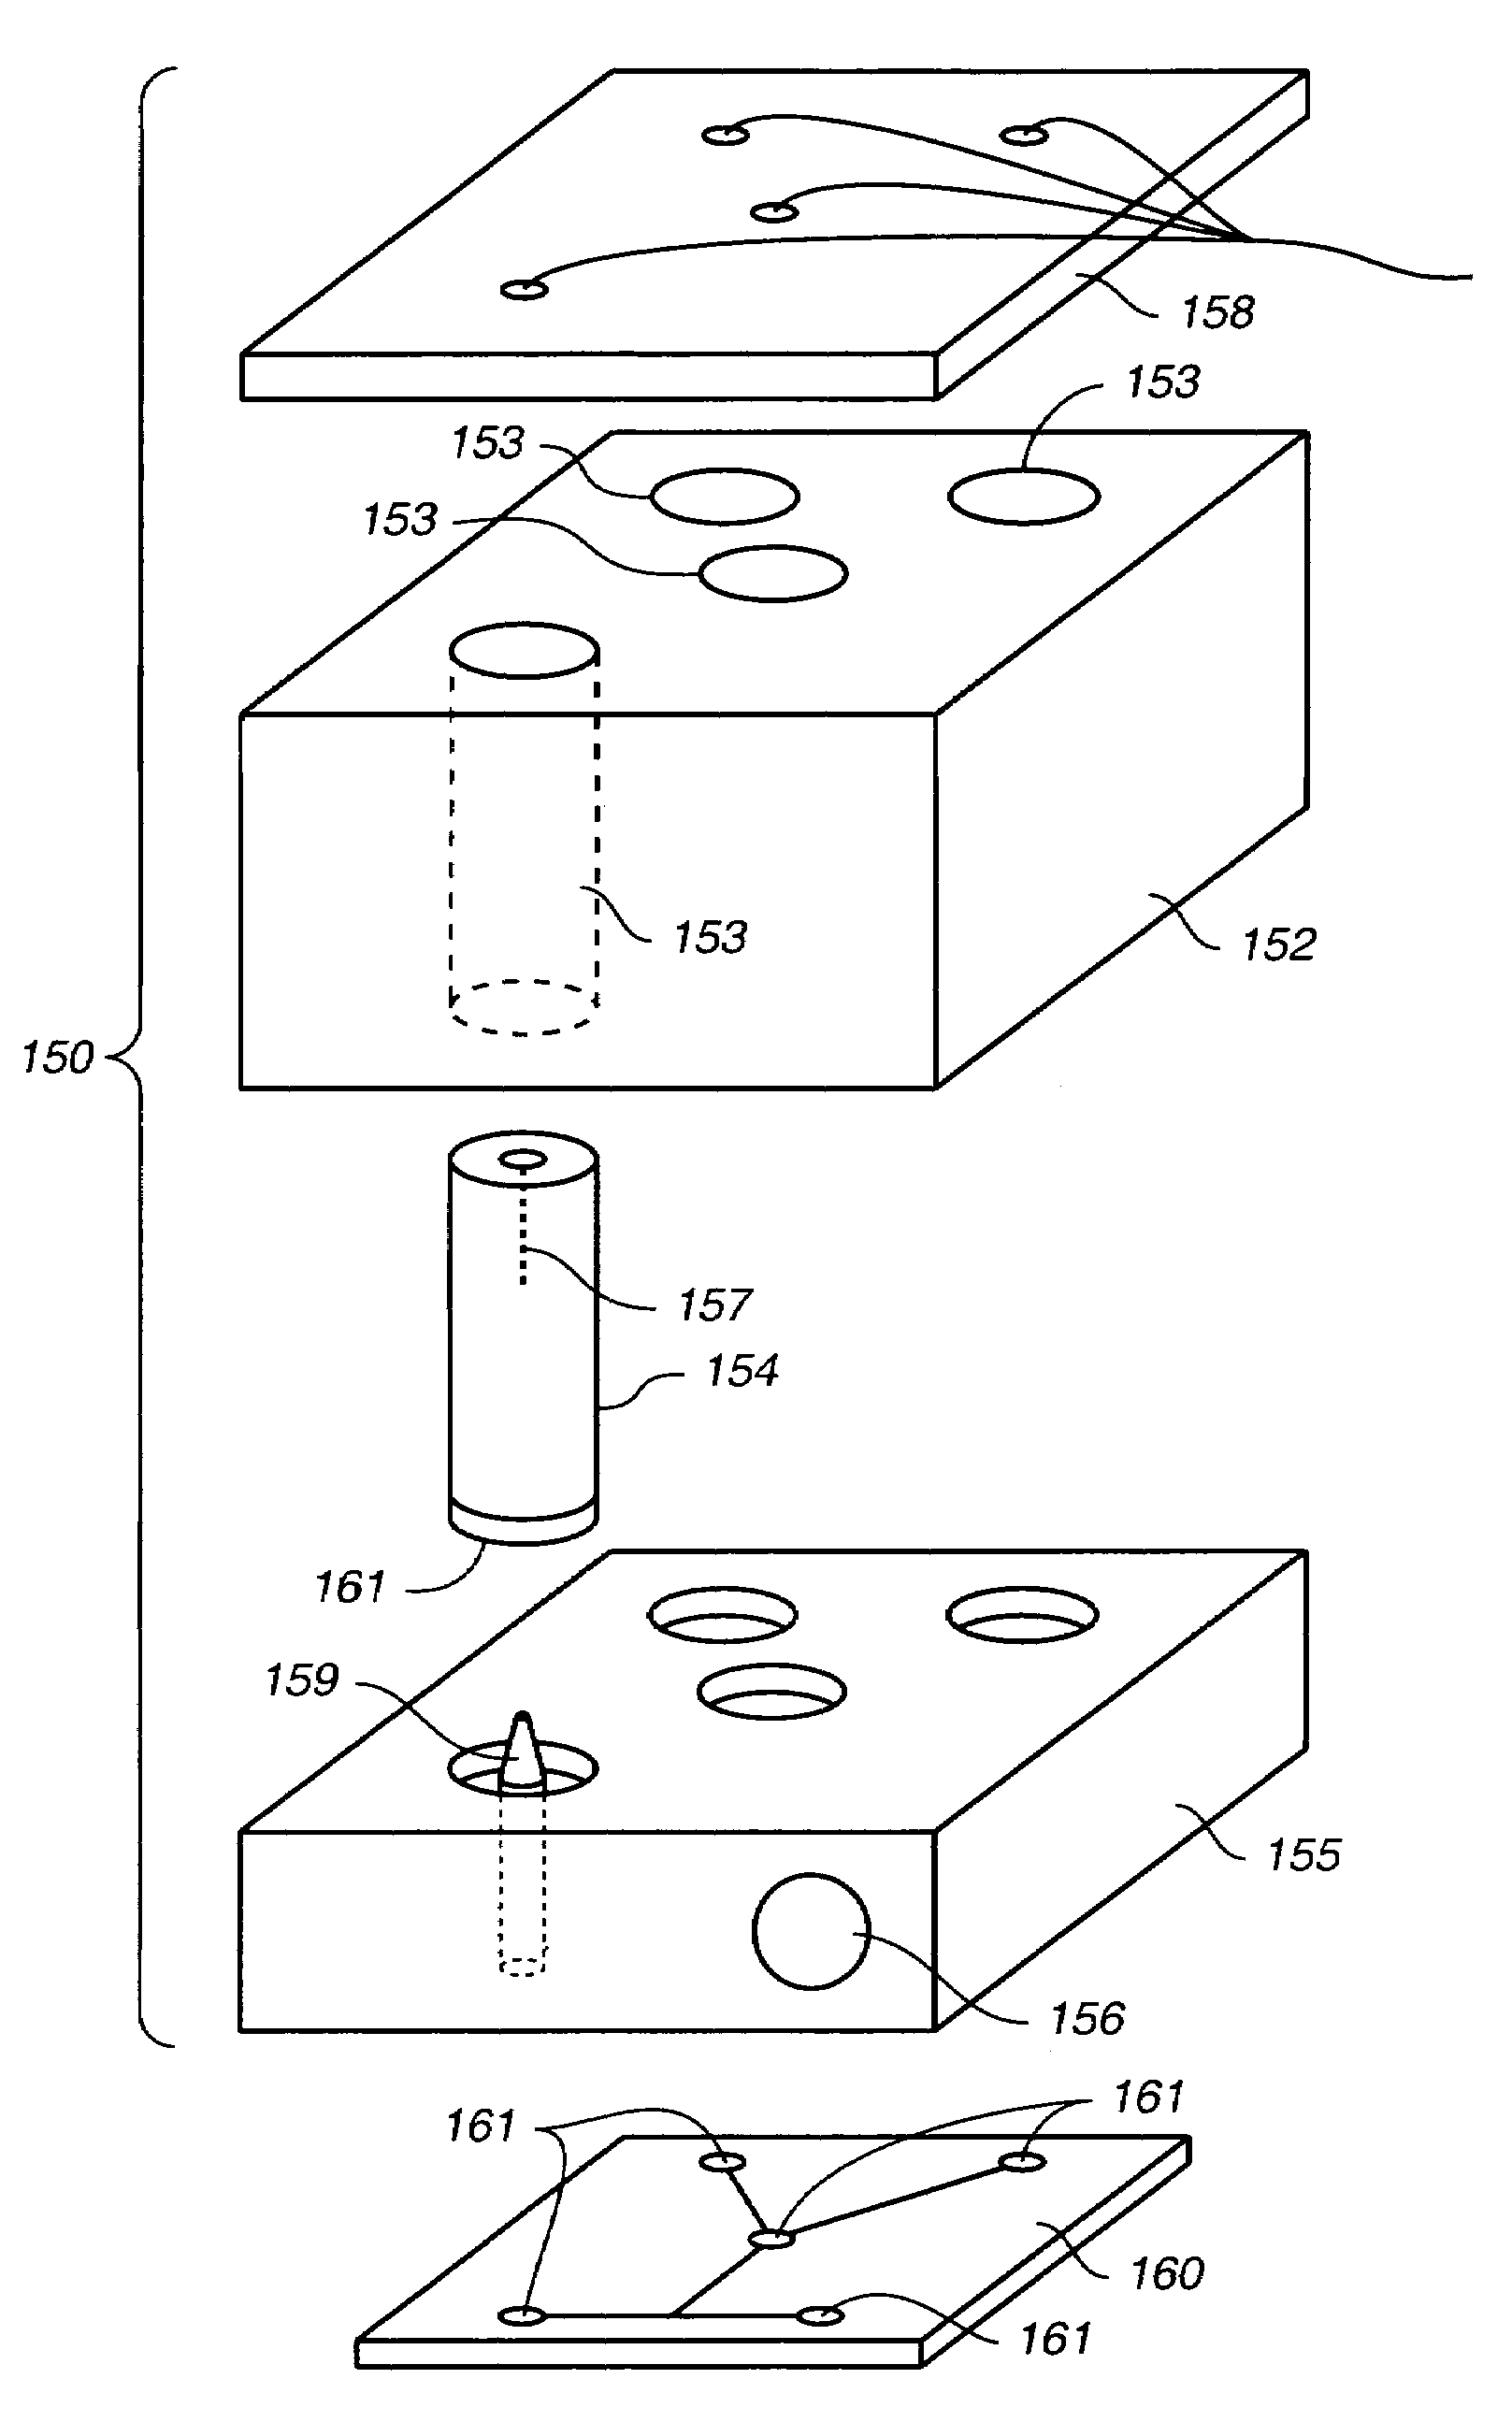 Portable apparatus for separating sample and detecting target analytes